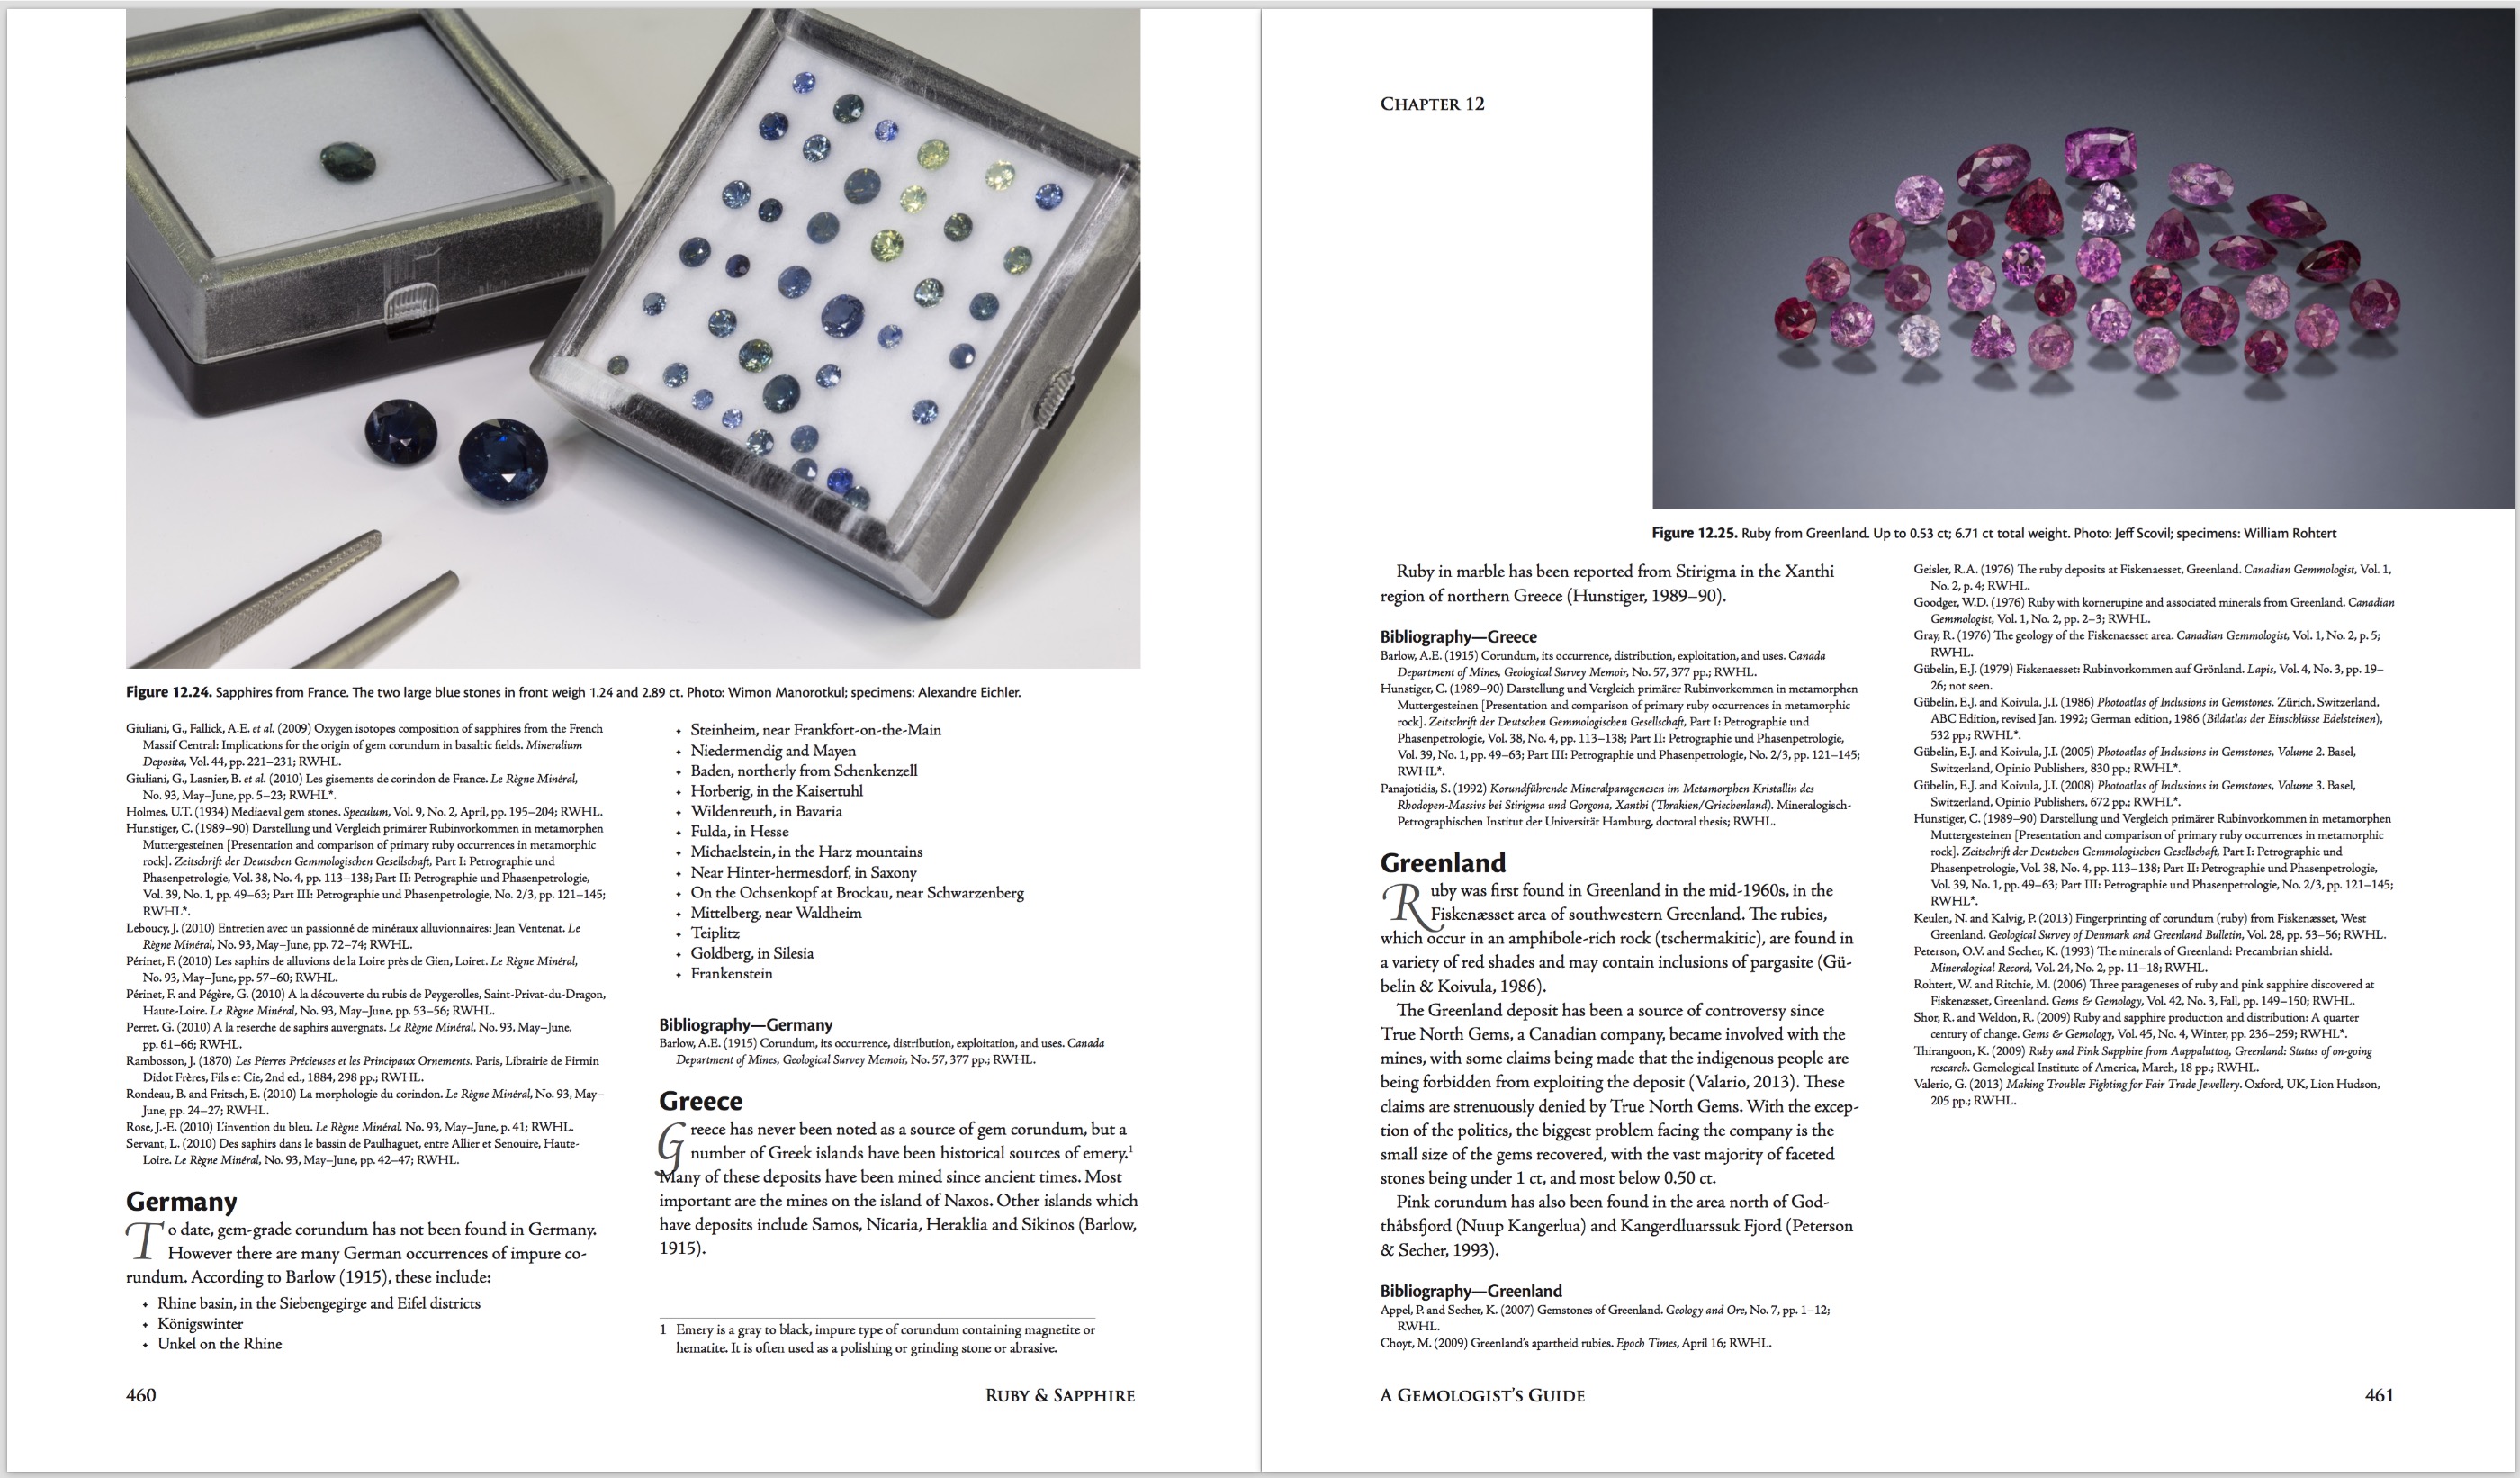 Ruby & Sapphire: A Gemologist's Guide – World Sources: France & Greenland